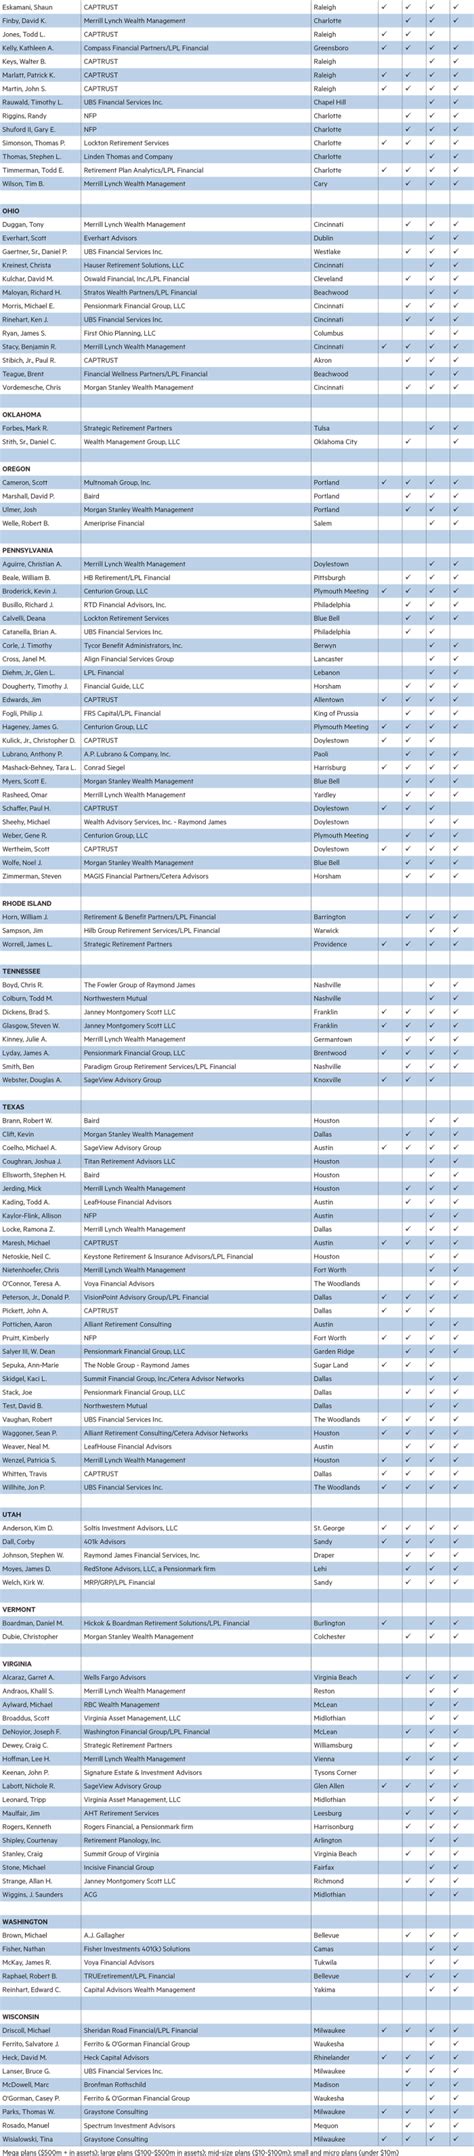 Ft 401 Complete List Of The Top Us Retirement Advisers